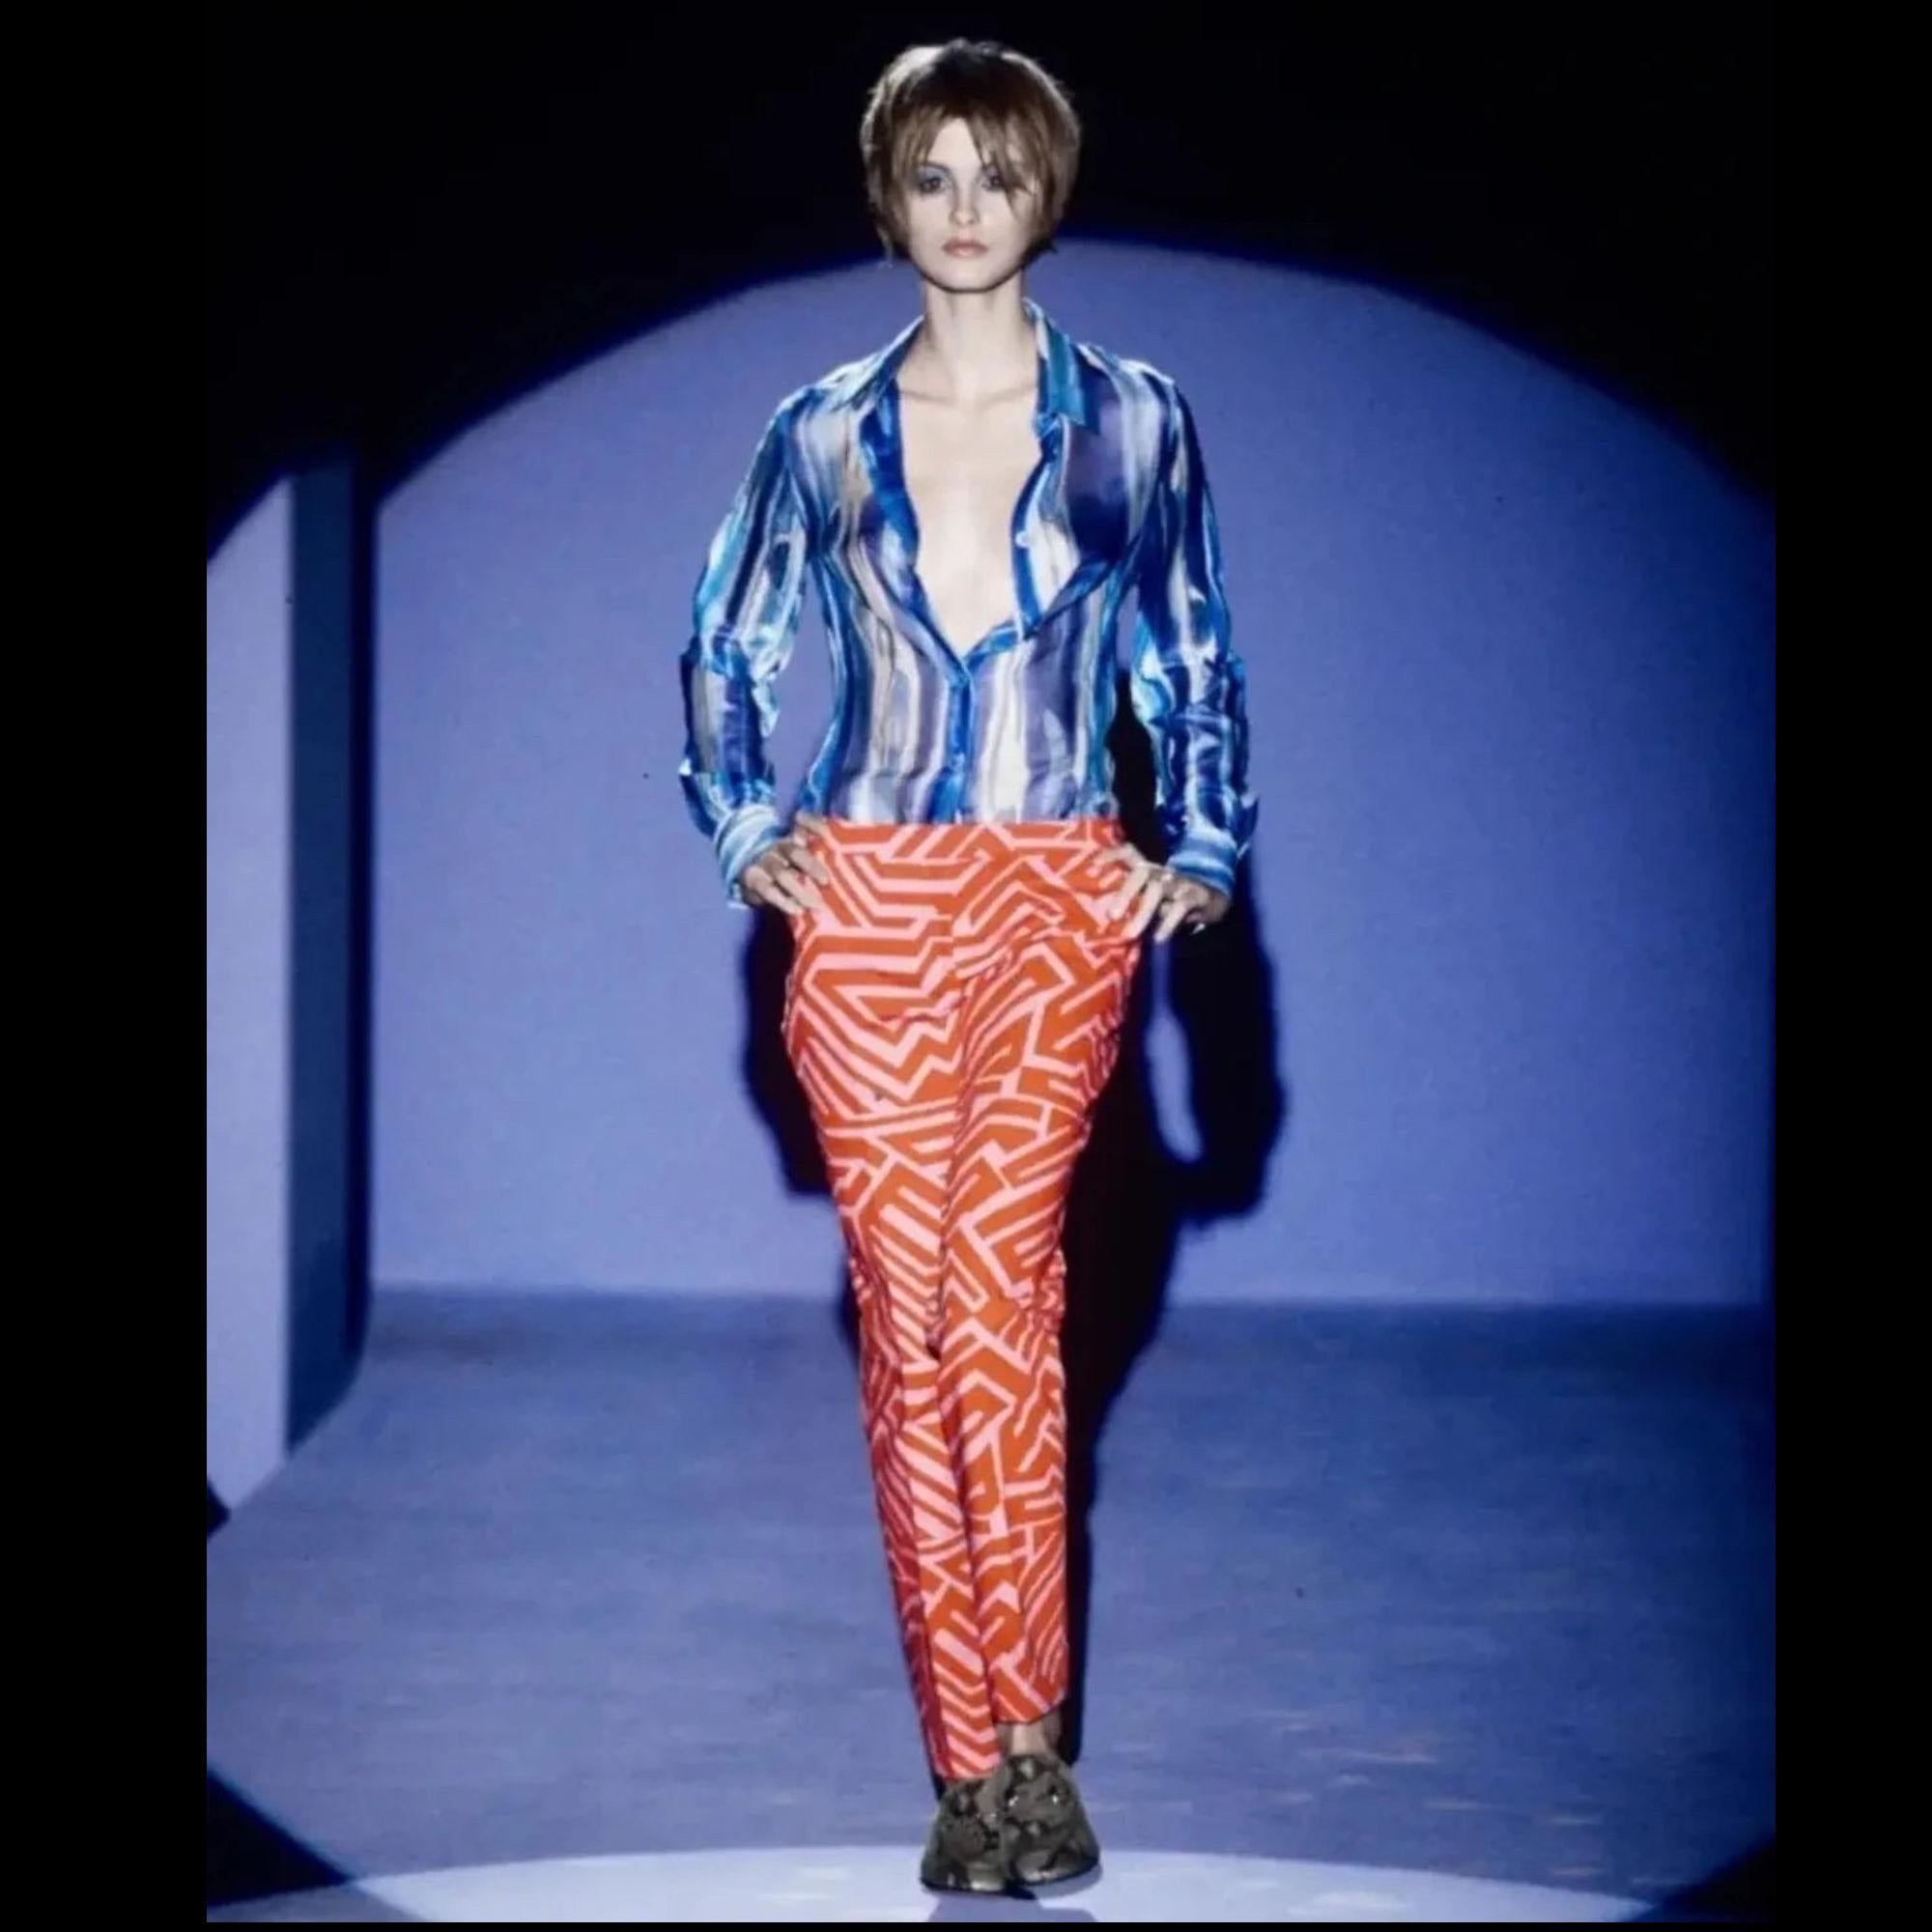 GUCCI
S/S 1996 by Tom Ford Abstract Colour Printed Silk Sheer Shirt

a sheer silk button-up top designed by Tom Ford for Gucci's Spring/Summer 1996 collection. This 1970s-inspired collection featured the same blouse in blue in the runway